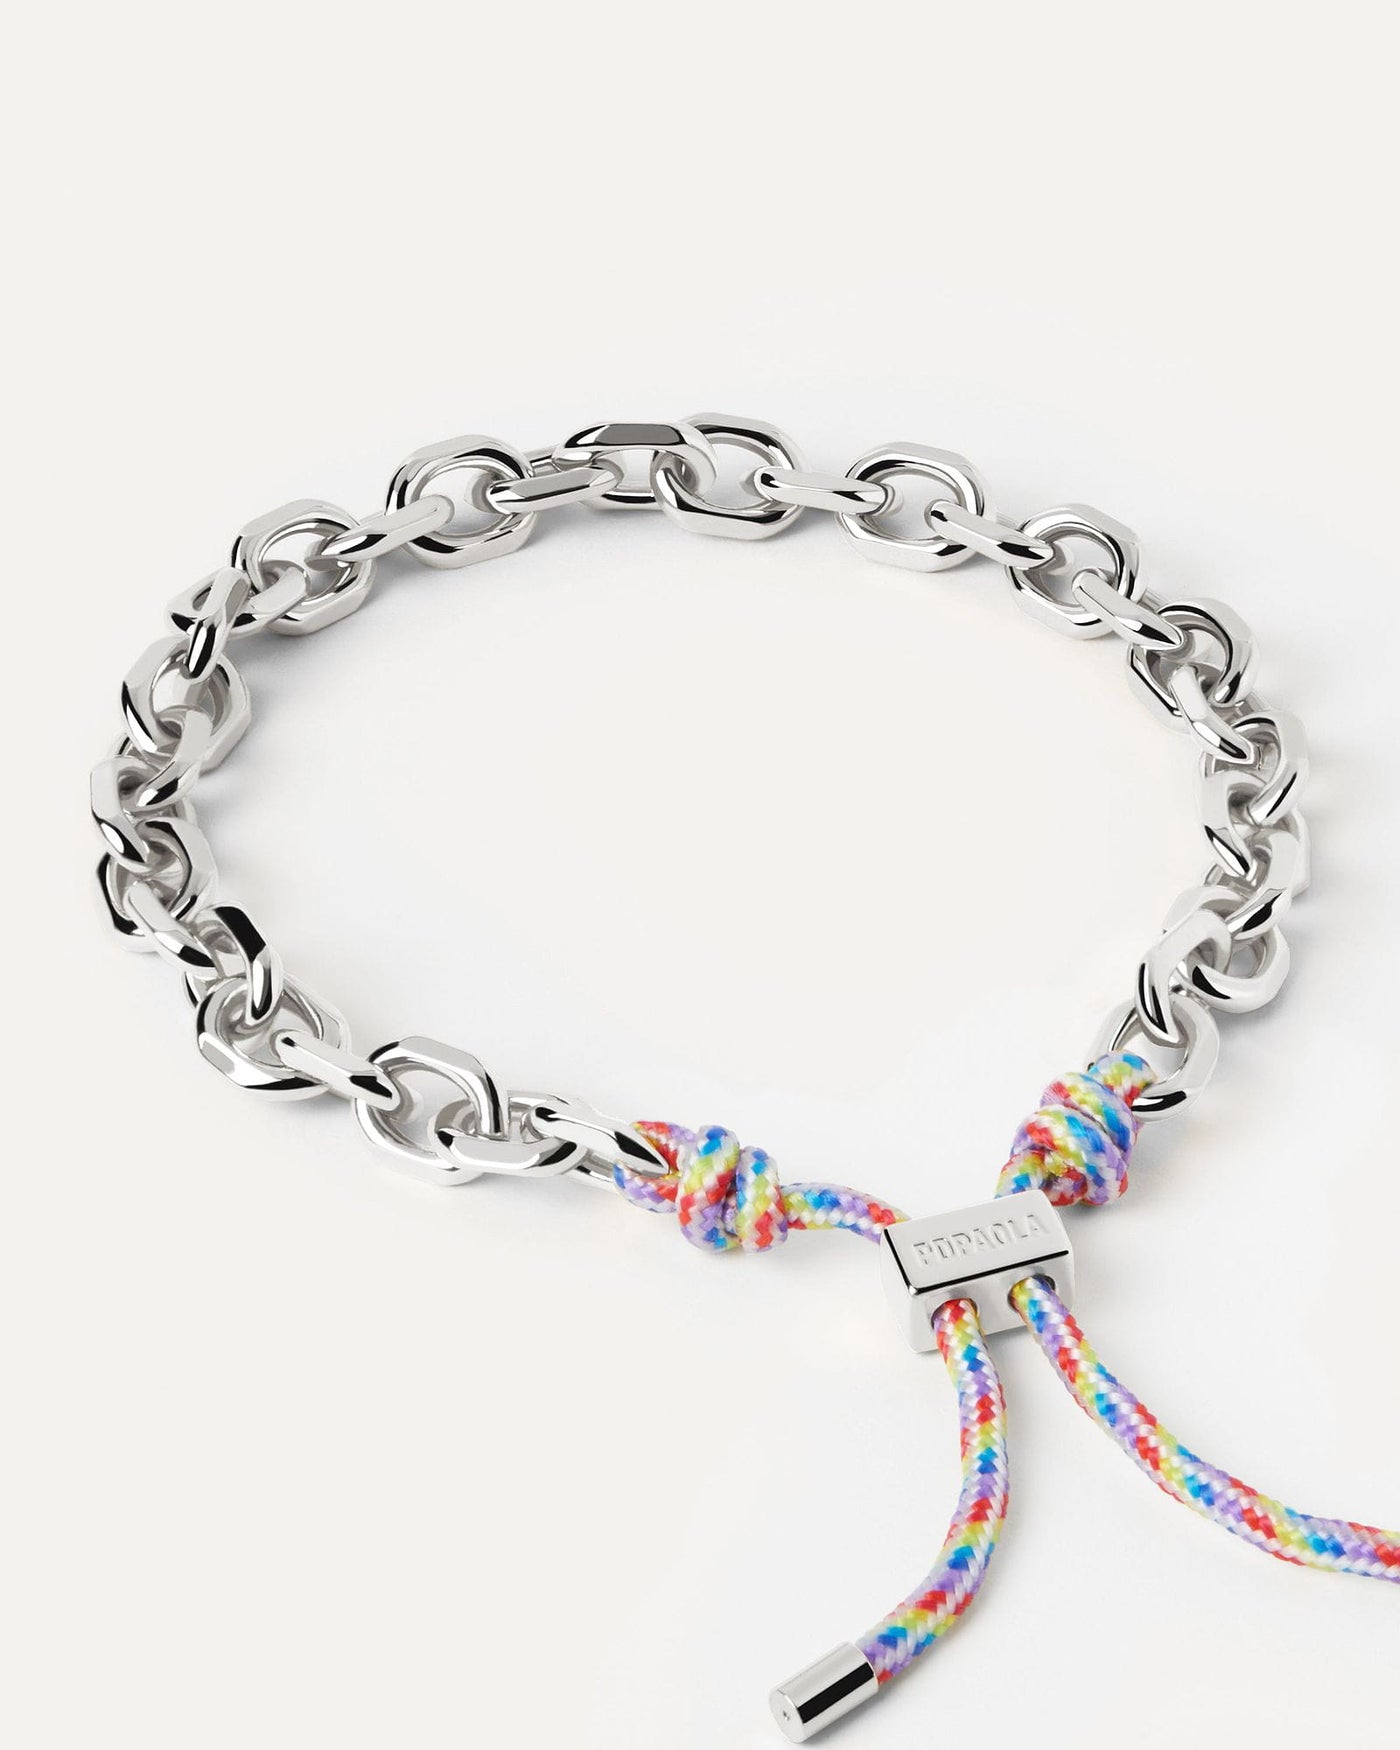 2024 Selection | Prisma Essential Rope and Chain Silver Bracelet. Silver chain bracelet with a navy blue rope adjustable sliding clasp. Get the latest arrival from PDPAOLA. Place your order safely and get this Best Seller. Free Shipping.